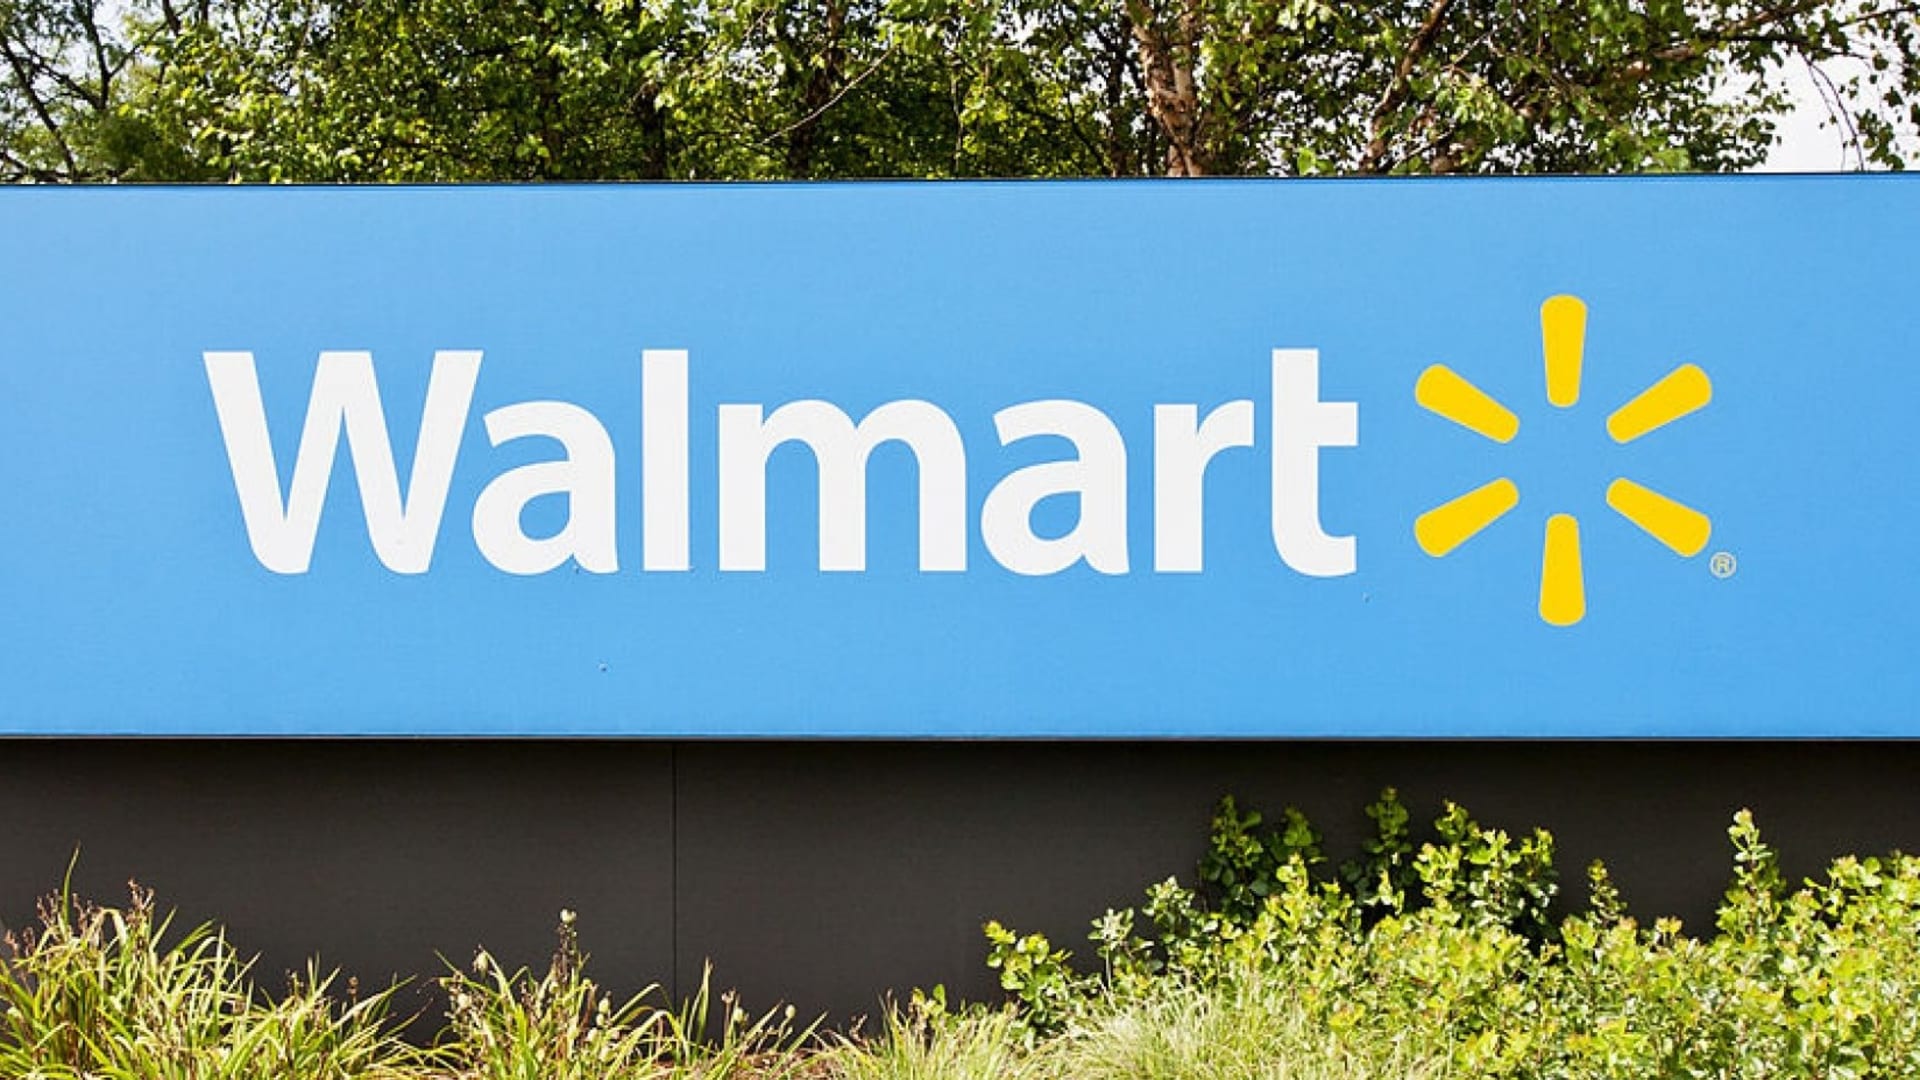 Walmart Just Made a Change That Could Shape Its Future for Years. It's a Lesson in Emotional Intelligence